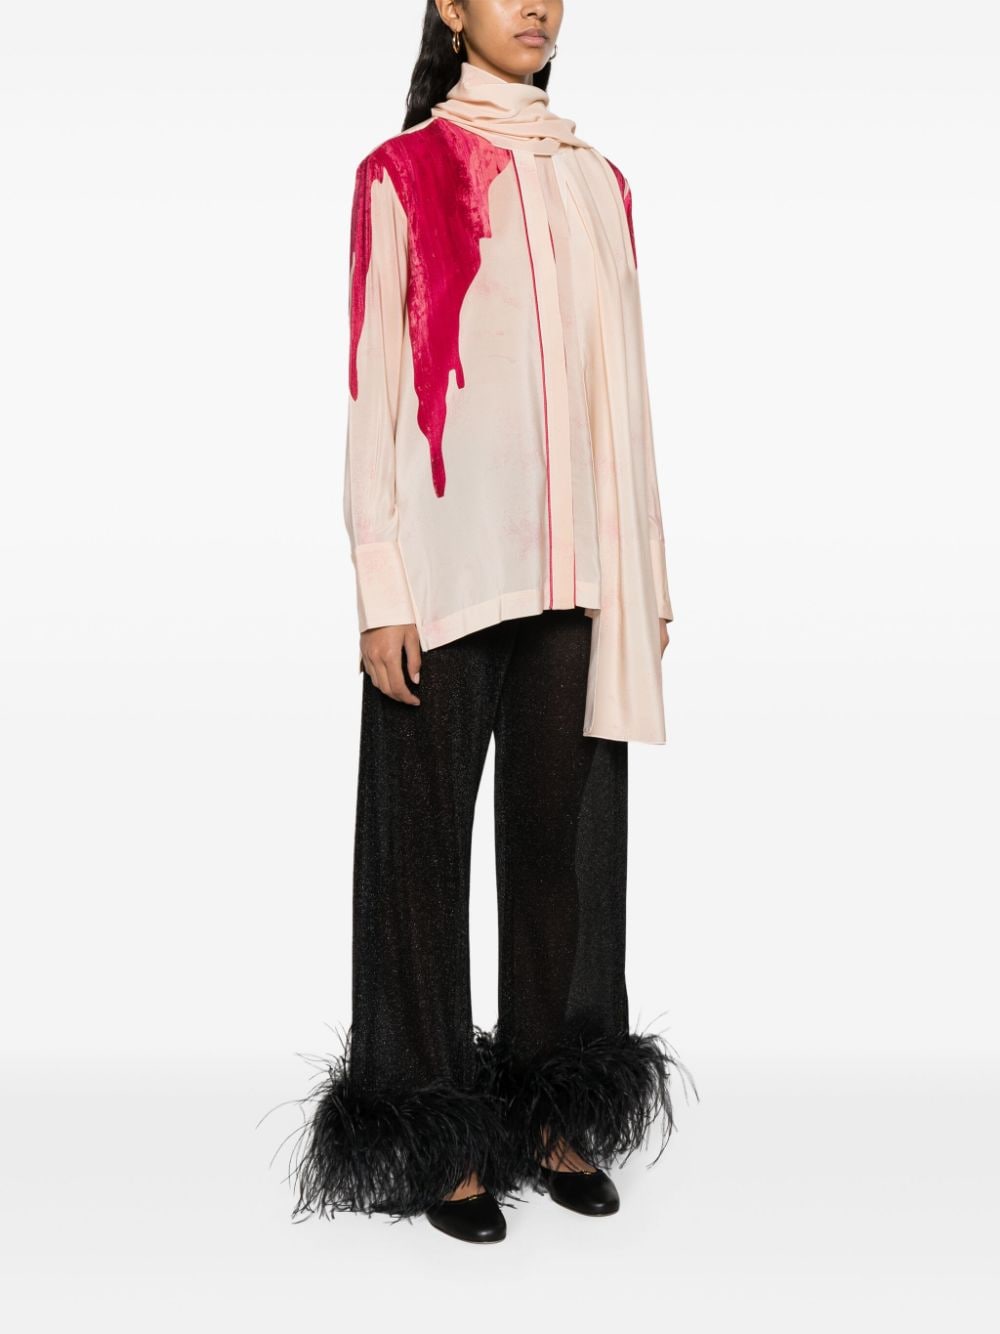 F.R.S FOR RESTLESS SLEEPERS Light Pink Palm Tree Print Silk Shirt with Detachable Scarf and Button Details